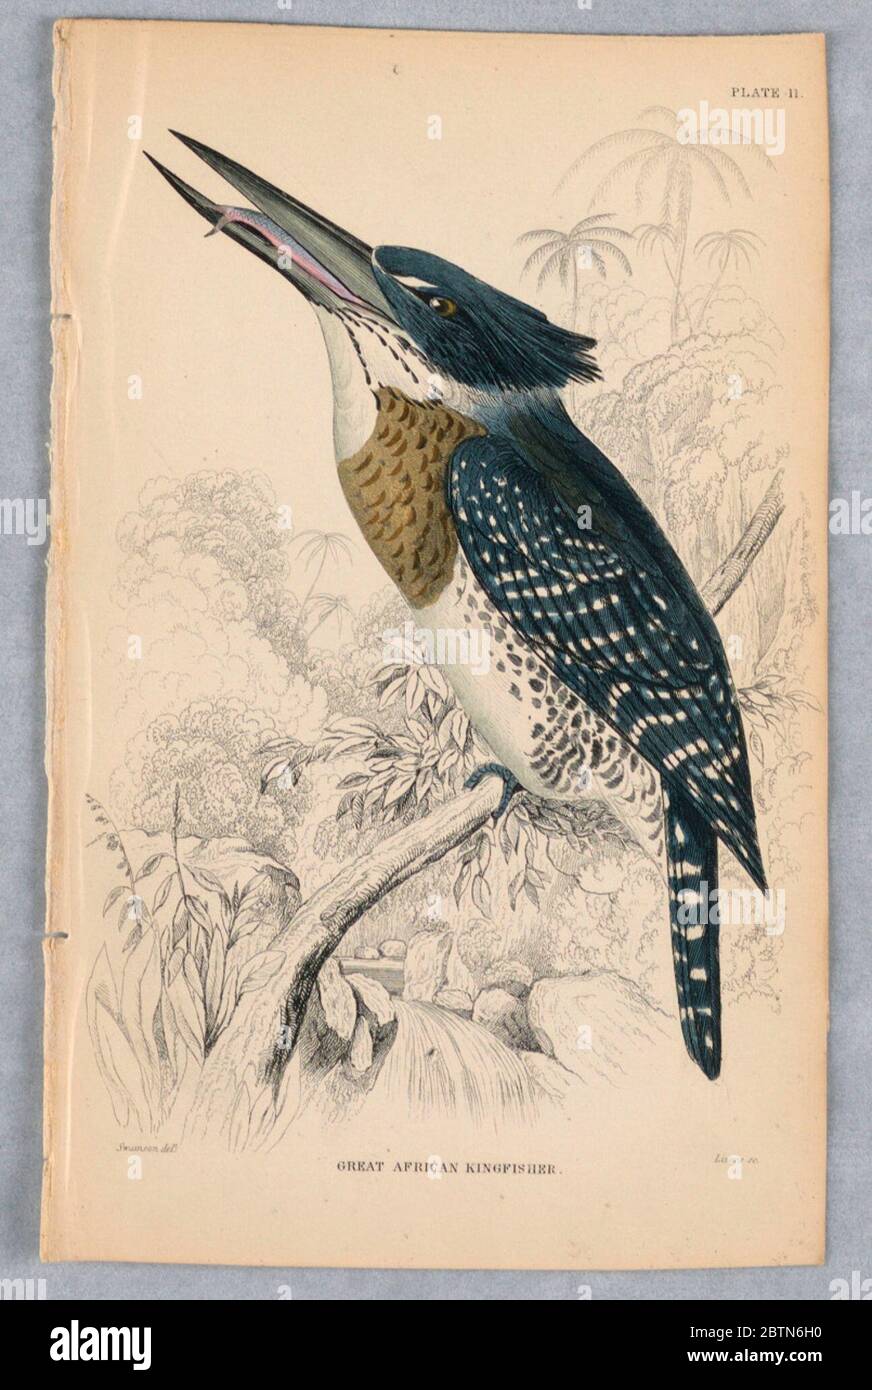 Great African Kingfisher Plate 11 from Birds of Western Africa. Research in ProgressLarge stocky bird on a branch over a waterfall, swallowing a fish. He has a white underside, with black spots, a brown bib, and the rest blue. Title and artists' names below. Stock Photo